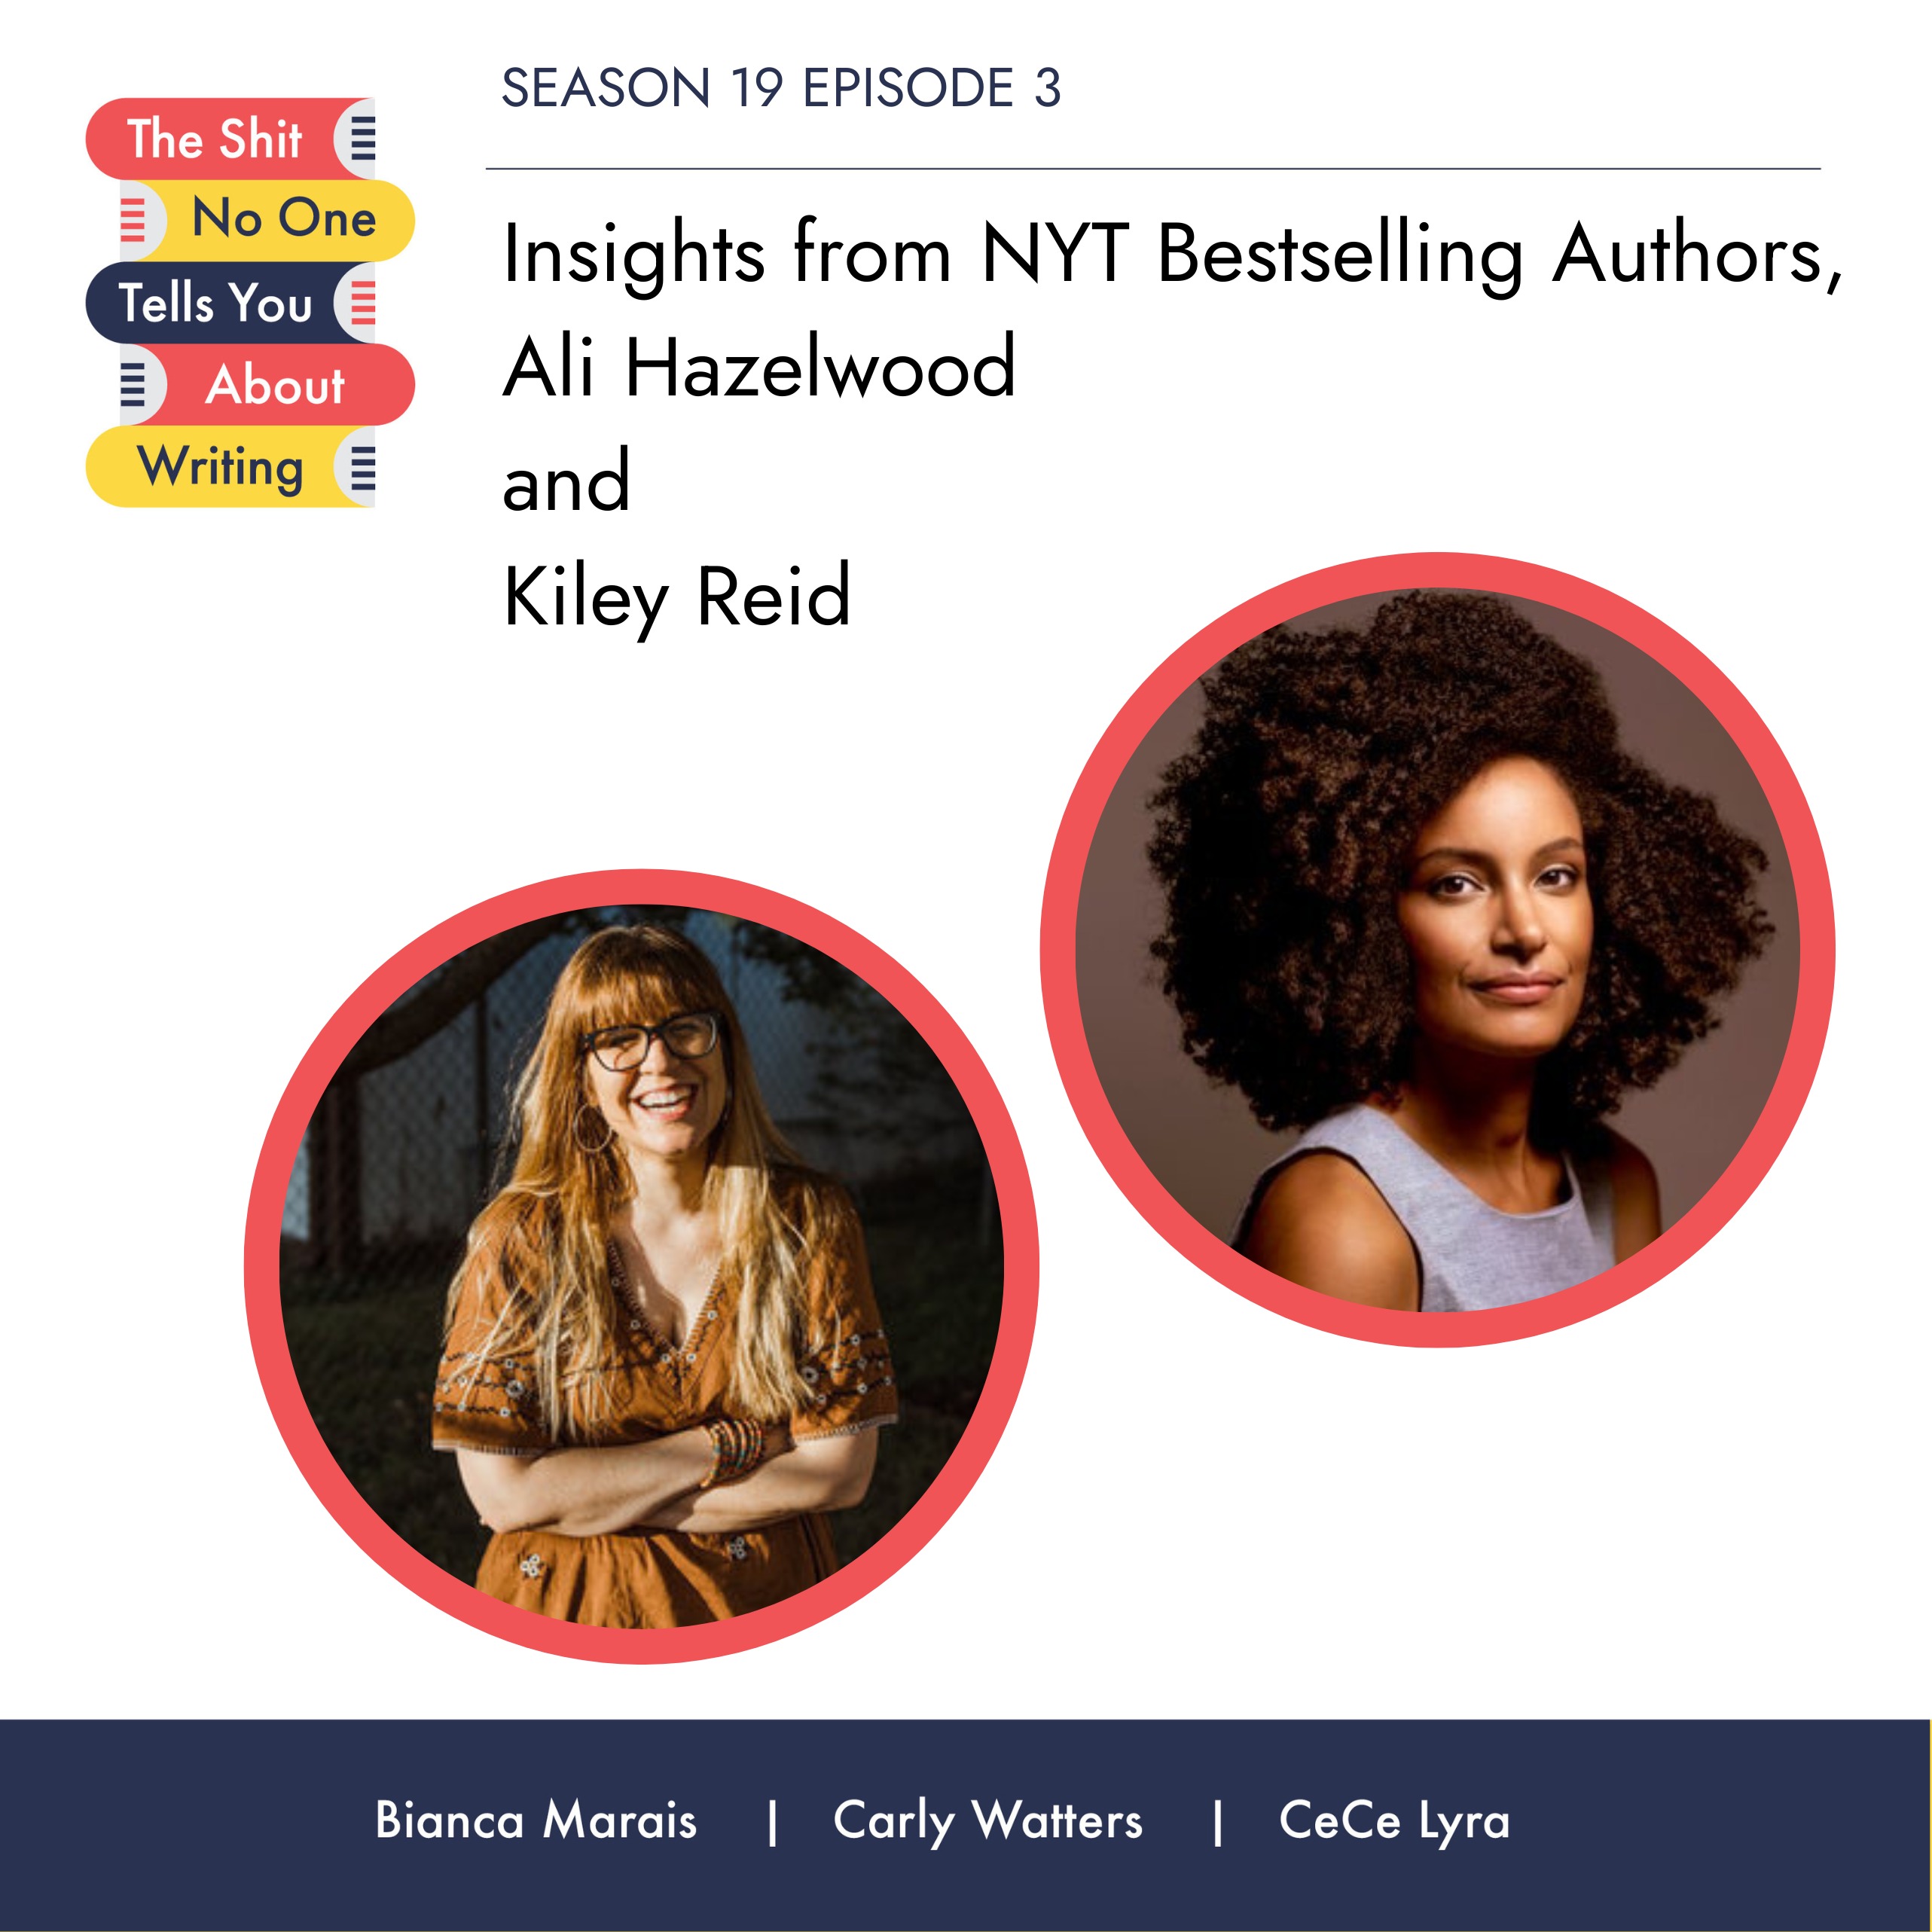 Insights from NYT Bestselling Authors, Ali Hazelwood and Kiley Reid